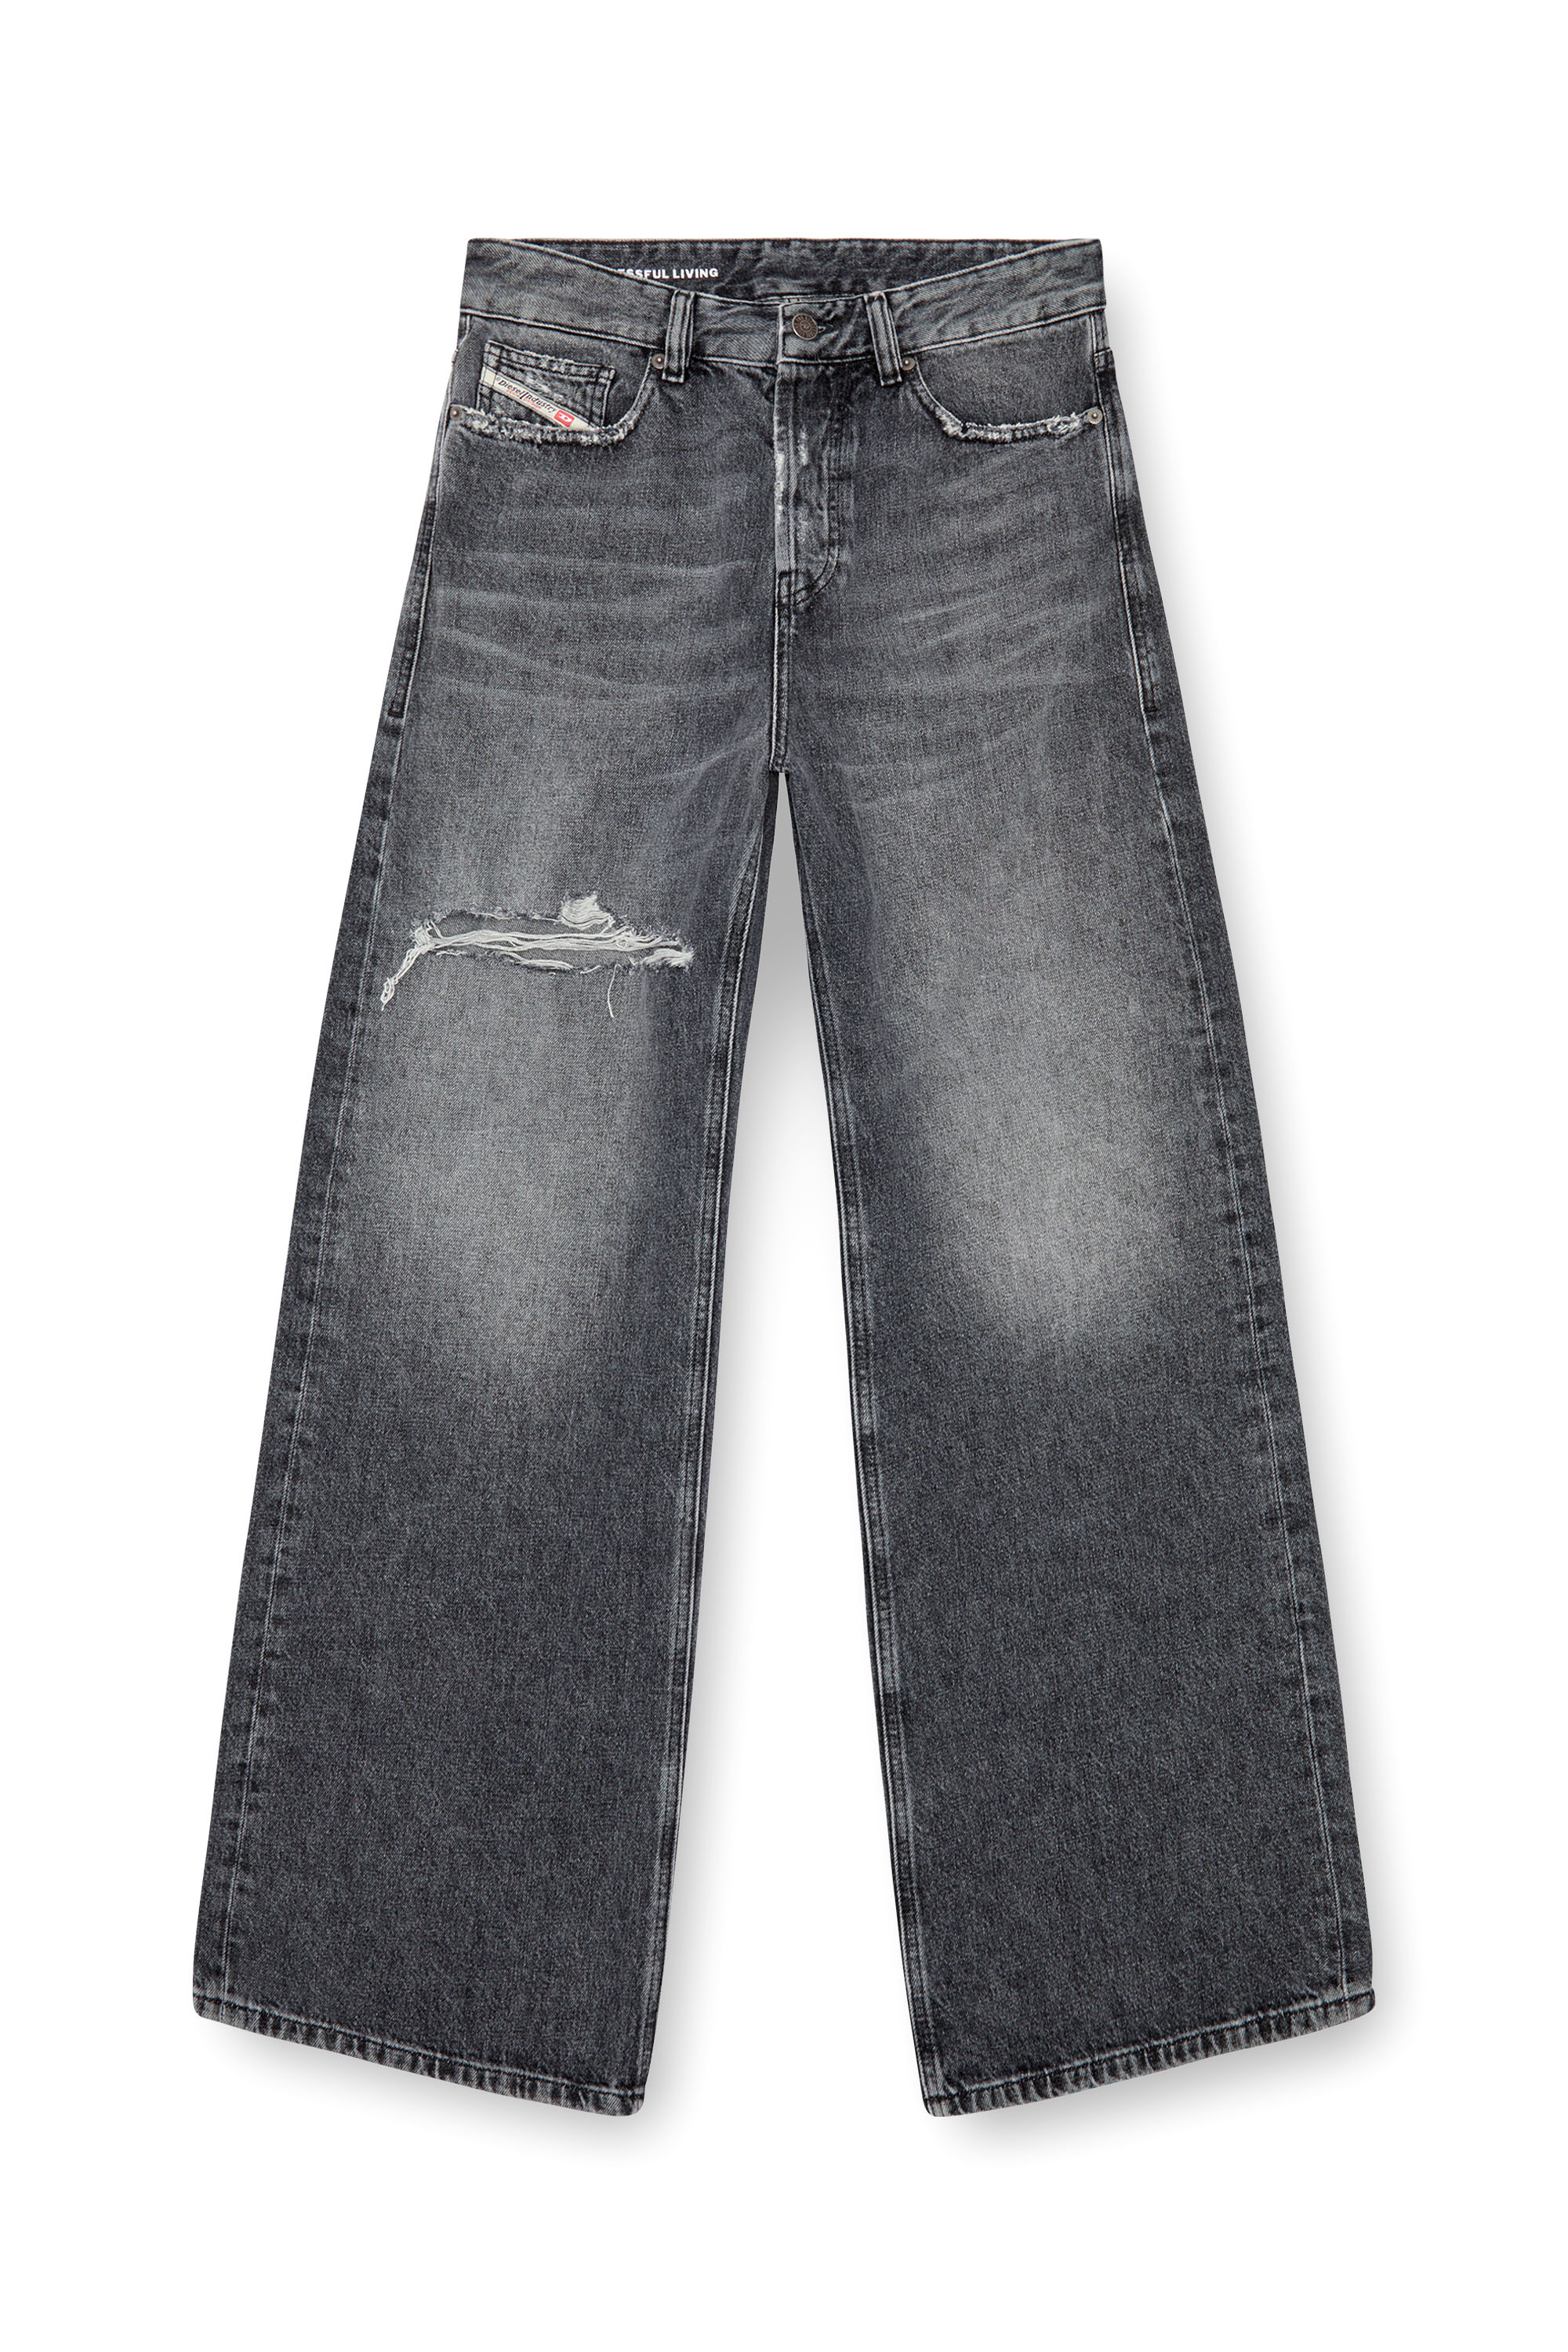 Diesel - Straight Jeans 1996 D-Sire 007X4, Mujer Straight Jeans - 1996 D-Sire in Negro - Image 6